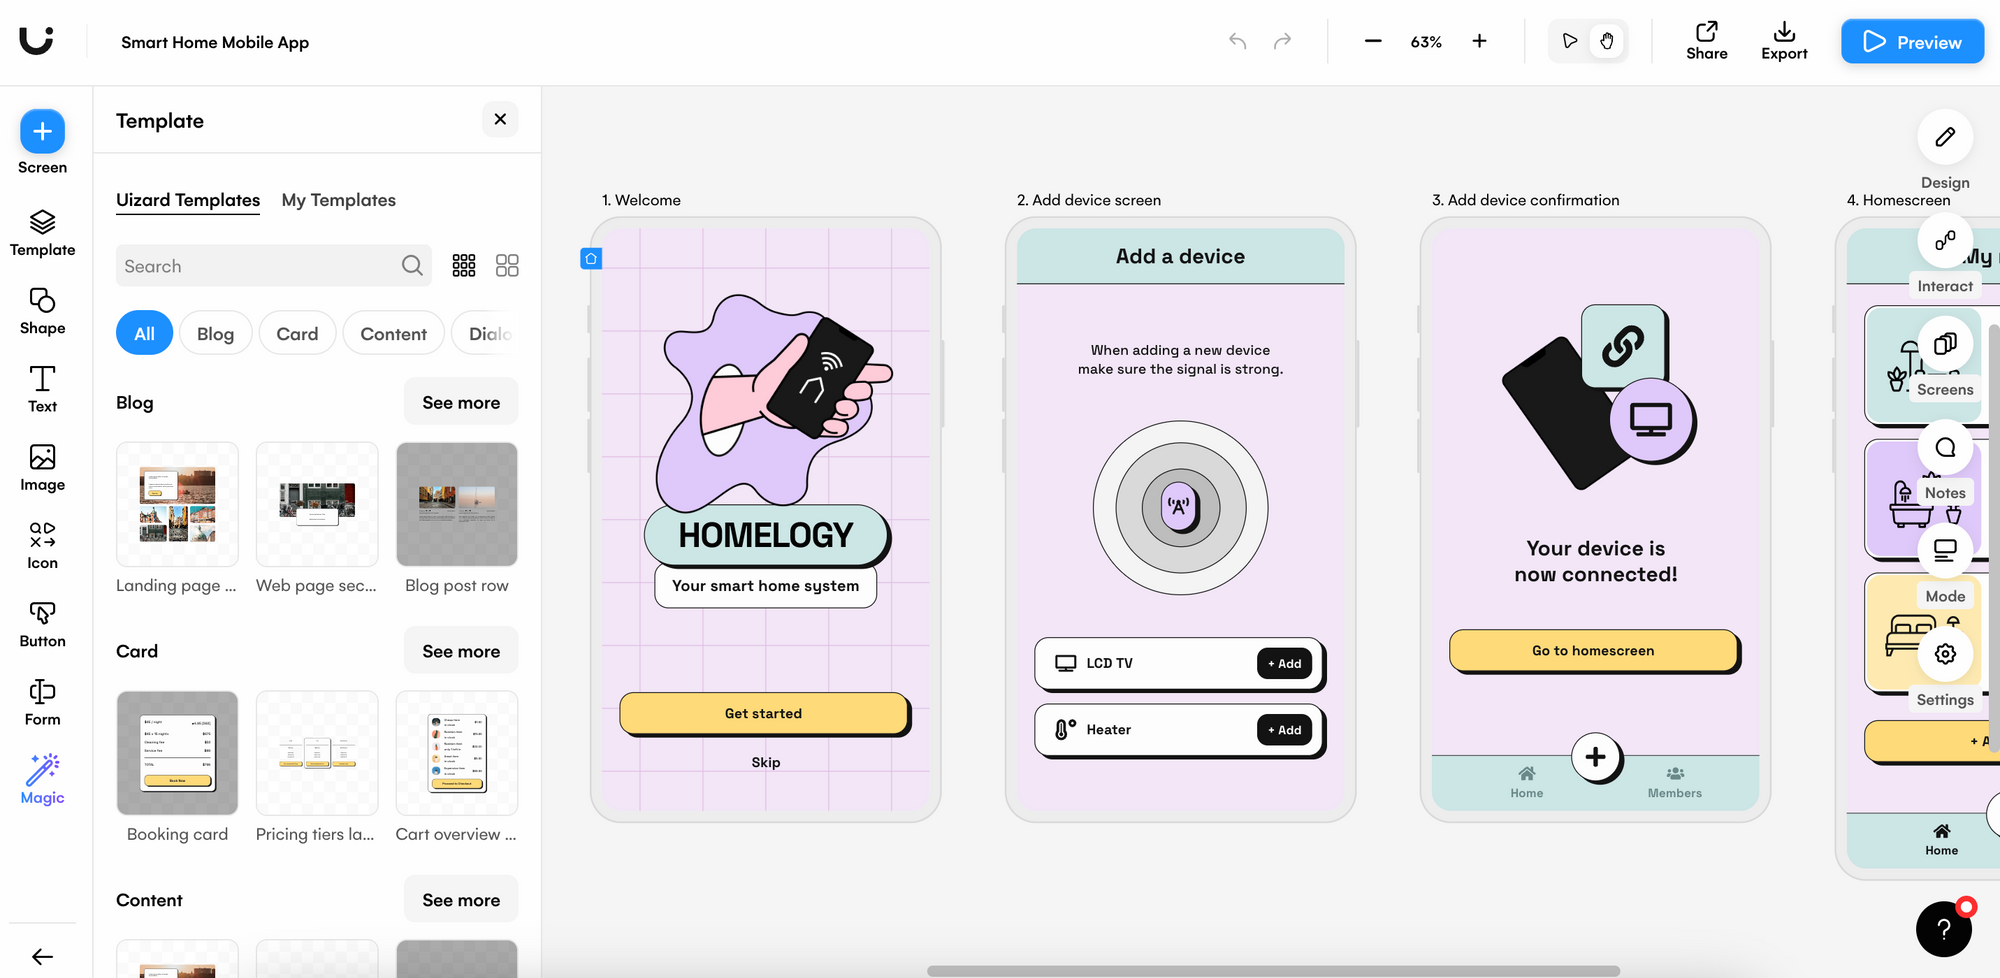 Everything About Digital Product Design (With Examples)